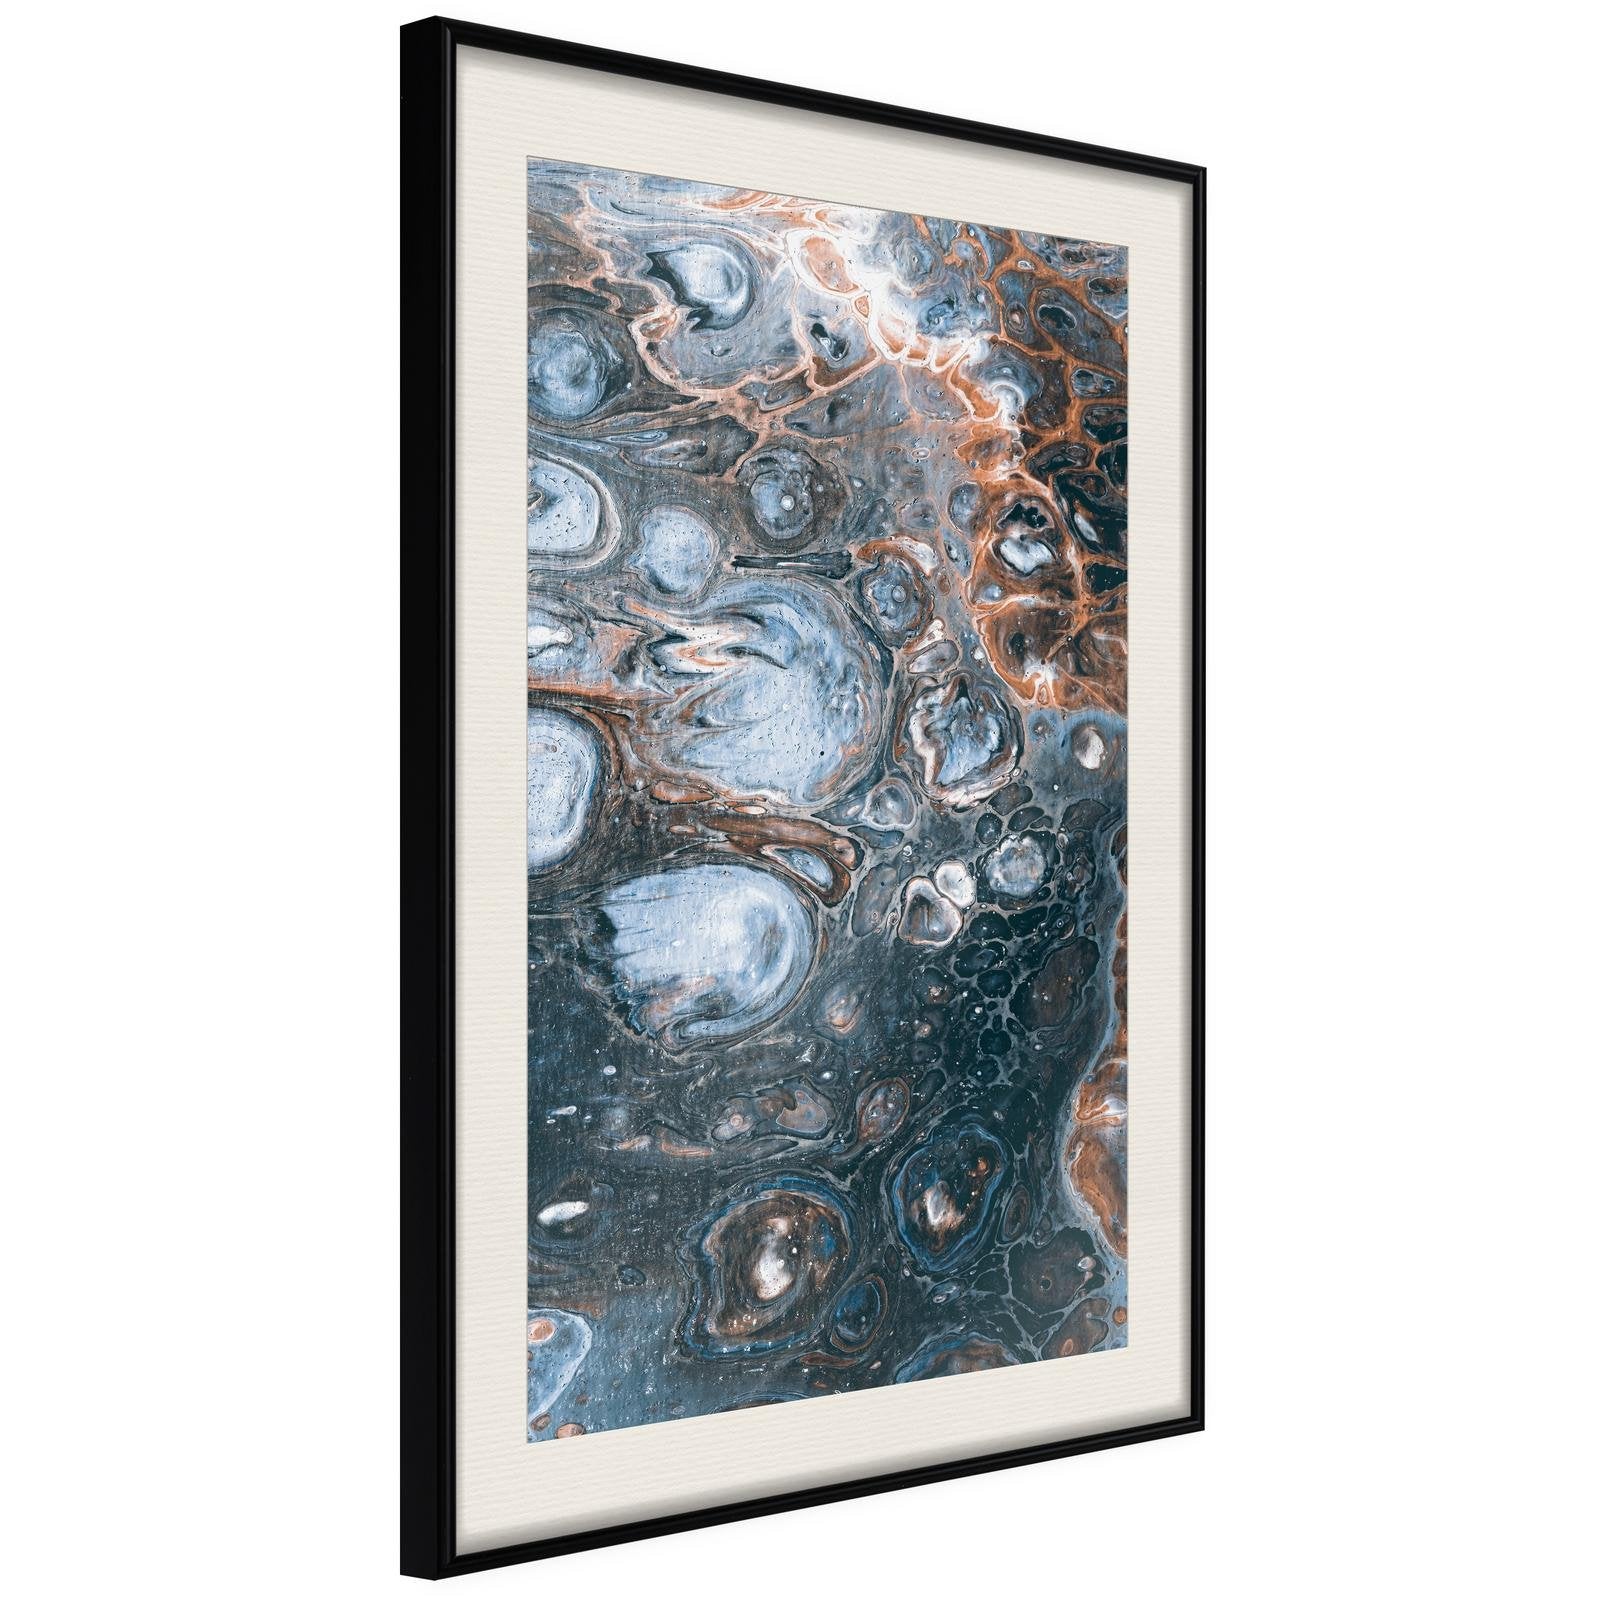 Inramad Poster / Tavla - Surface of the Unknown Planet I-Poster Inramad-Artgeist-20x30-Svart ram med passepartout-peaceofhome.se